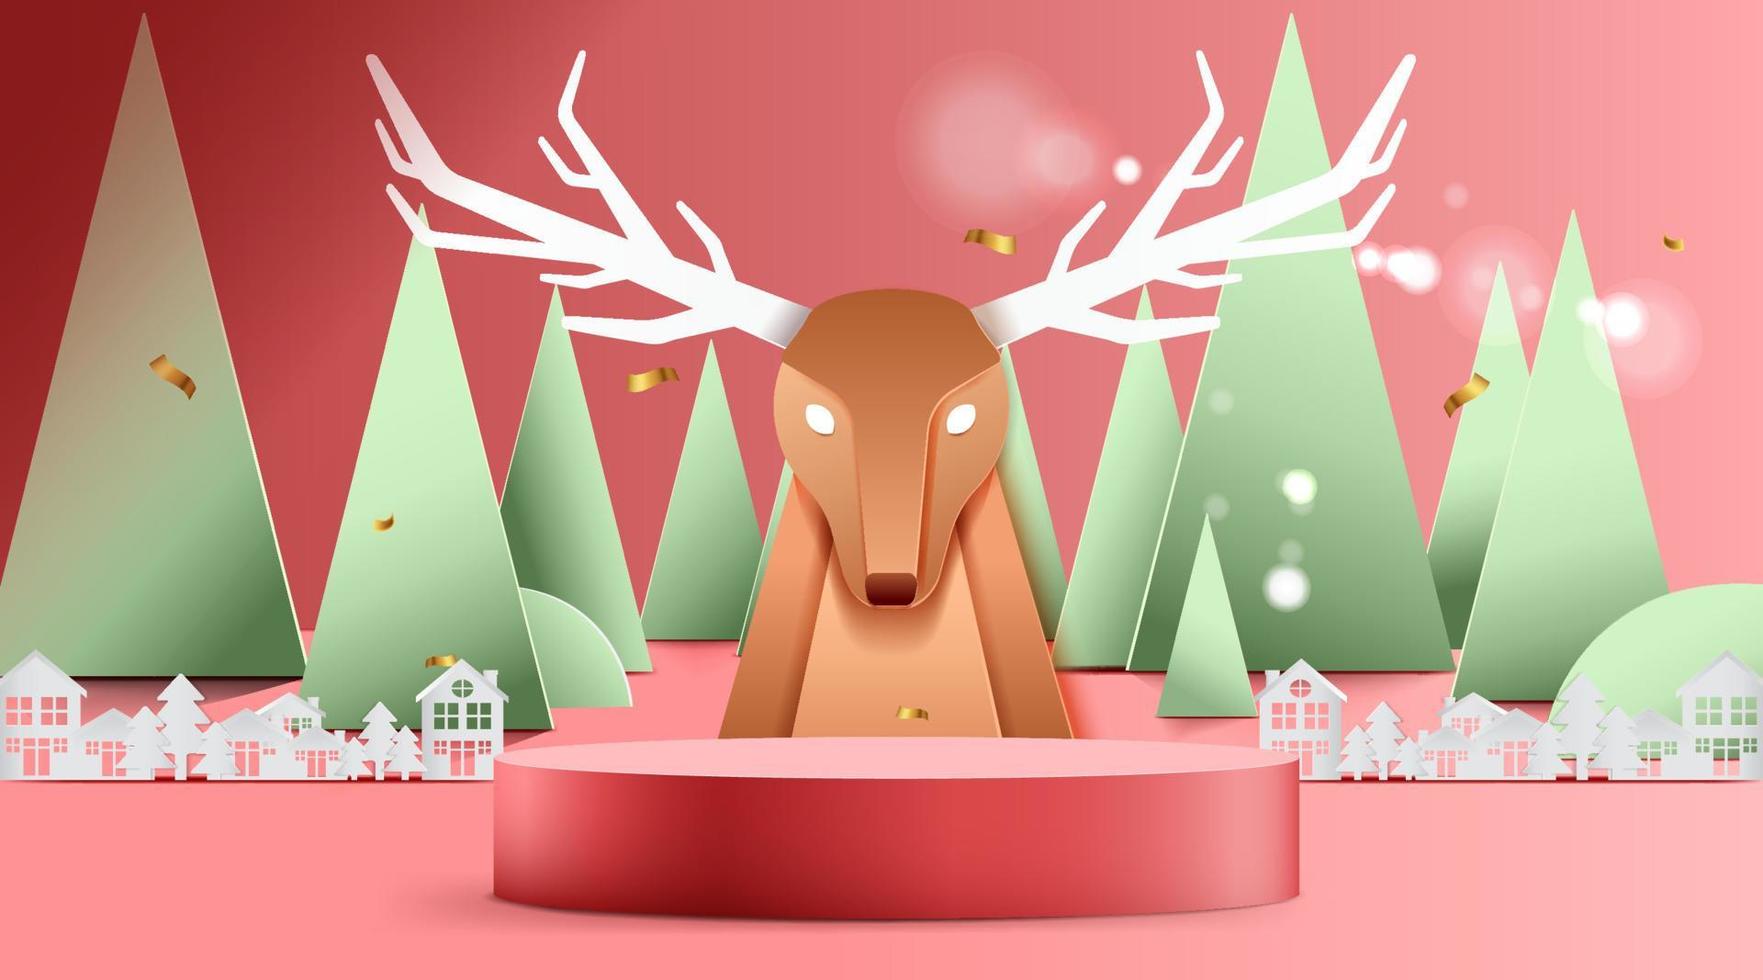 Merry Christmas and happy new year banner with decoration for christmas festival. vector